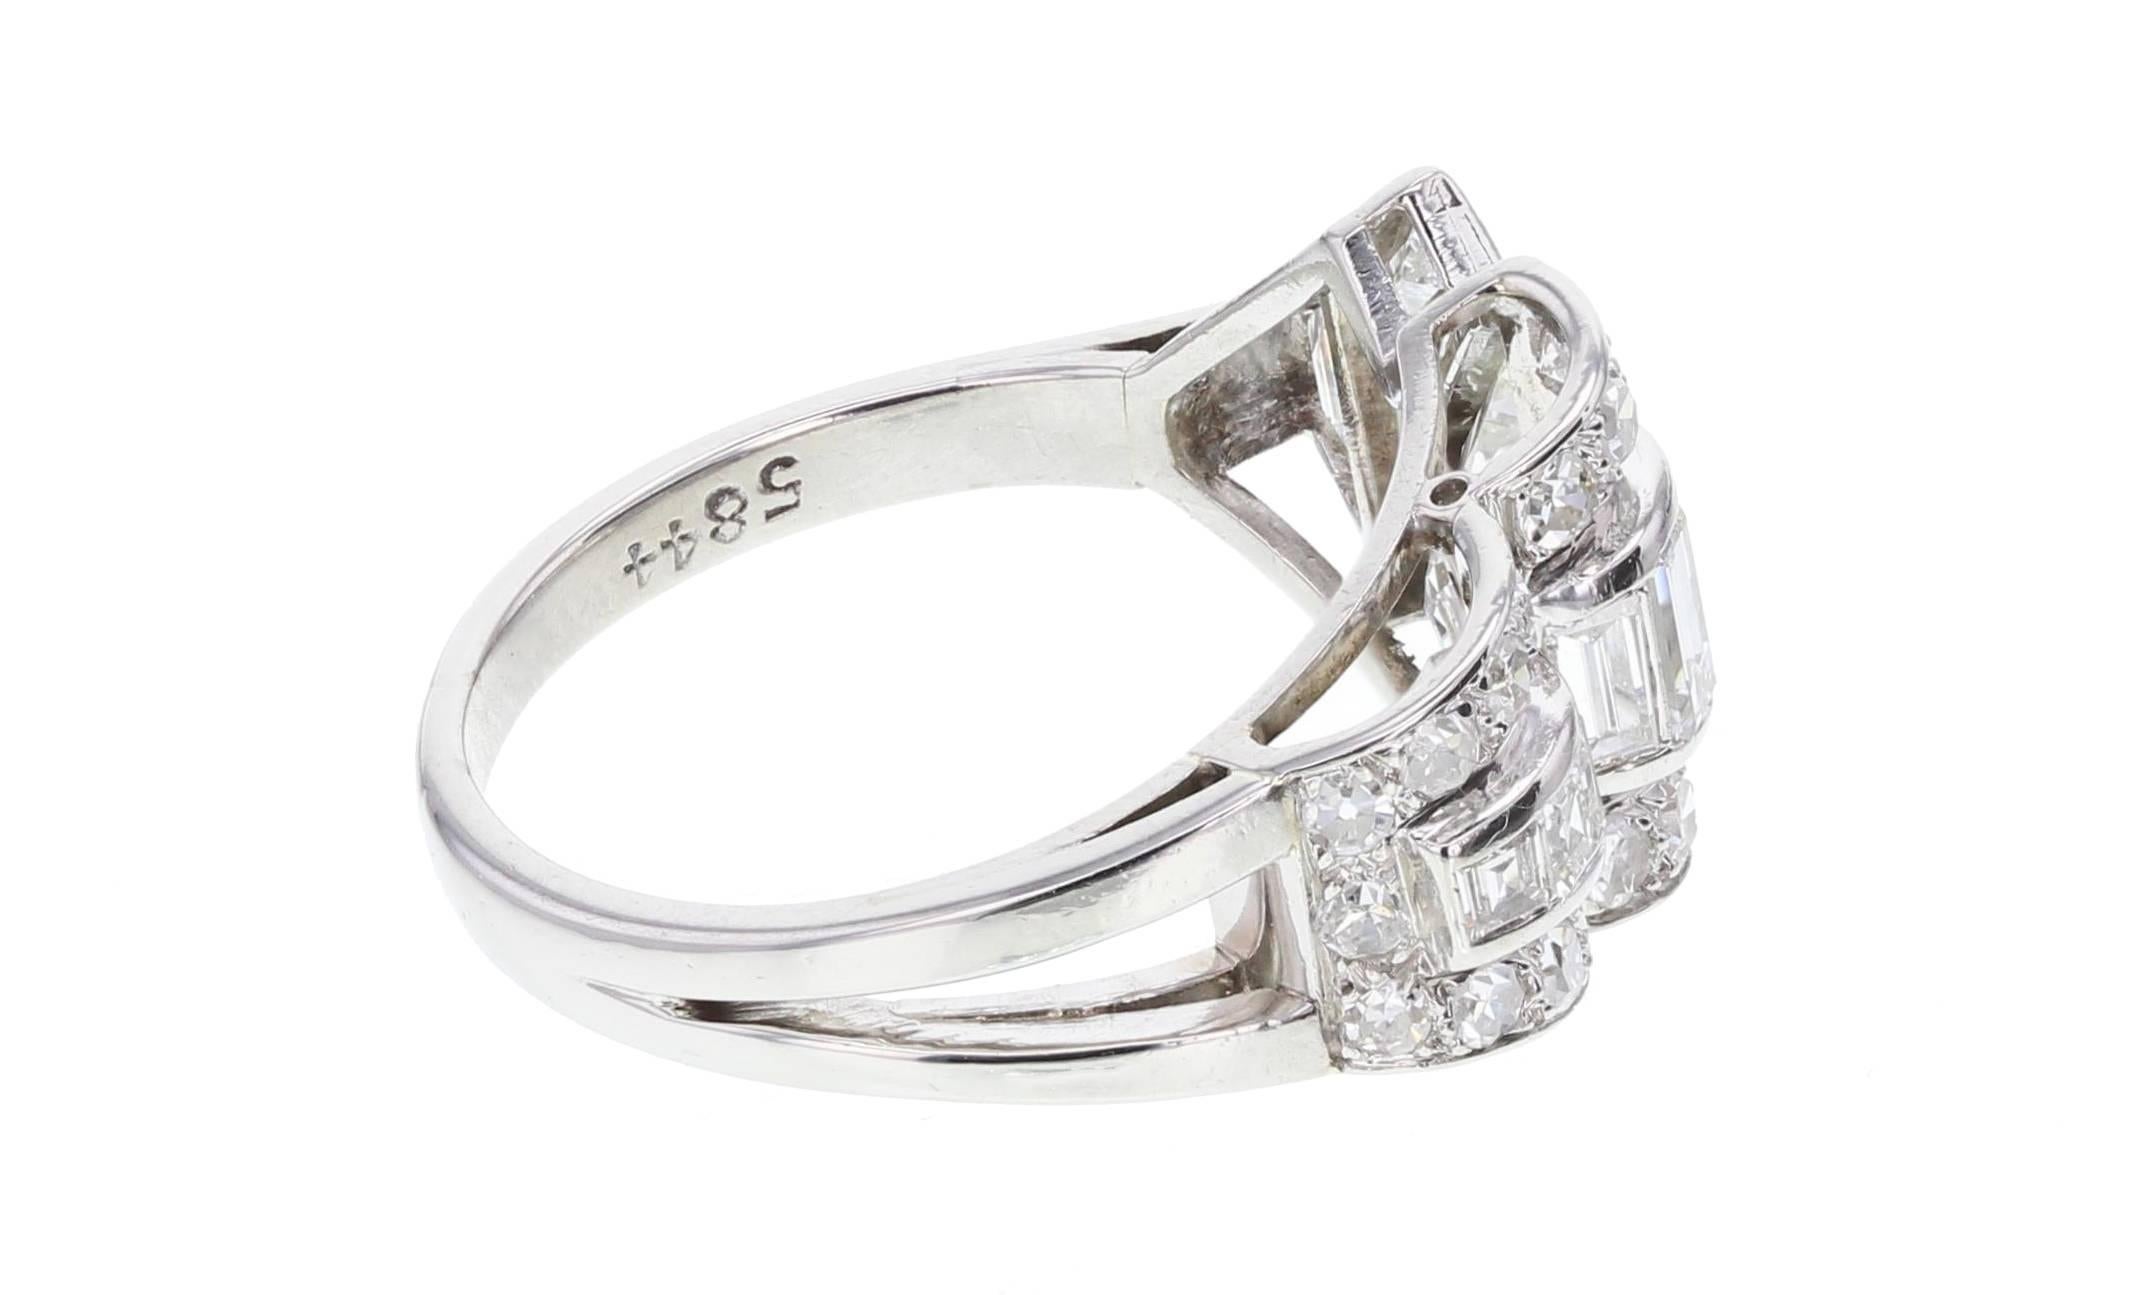 An exceptional example of Art Deco style. This geometric diamond cluster ring is crafted in platinum and contains a mixture of cuts giving it a compelling and unmistakable look. A great, stylish period piece sure to impress.
 
Shank and